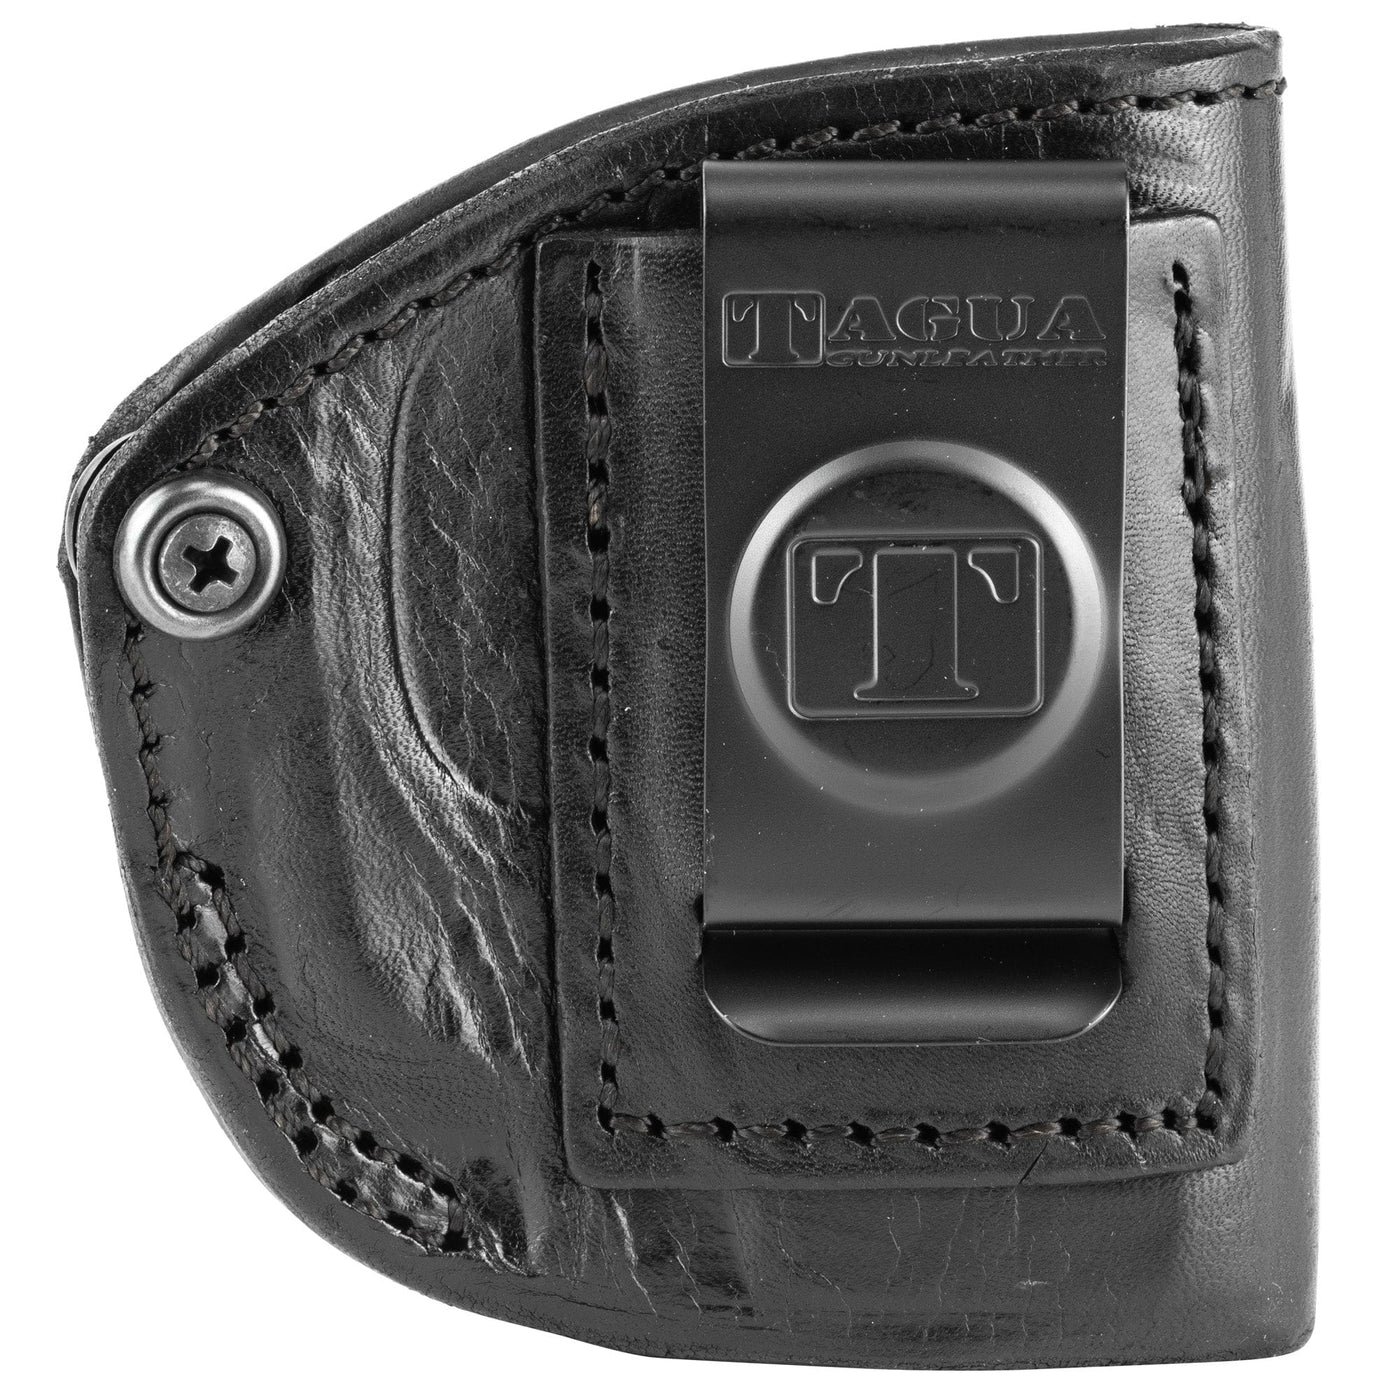 Tagua Tagua Iph 4-in-1 Rug Lc9 Ct Rh Blk Holsters